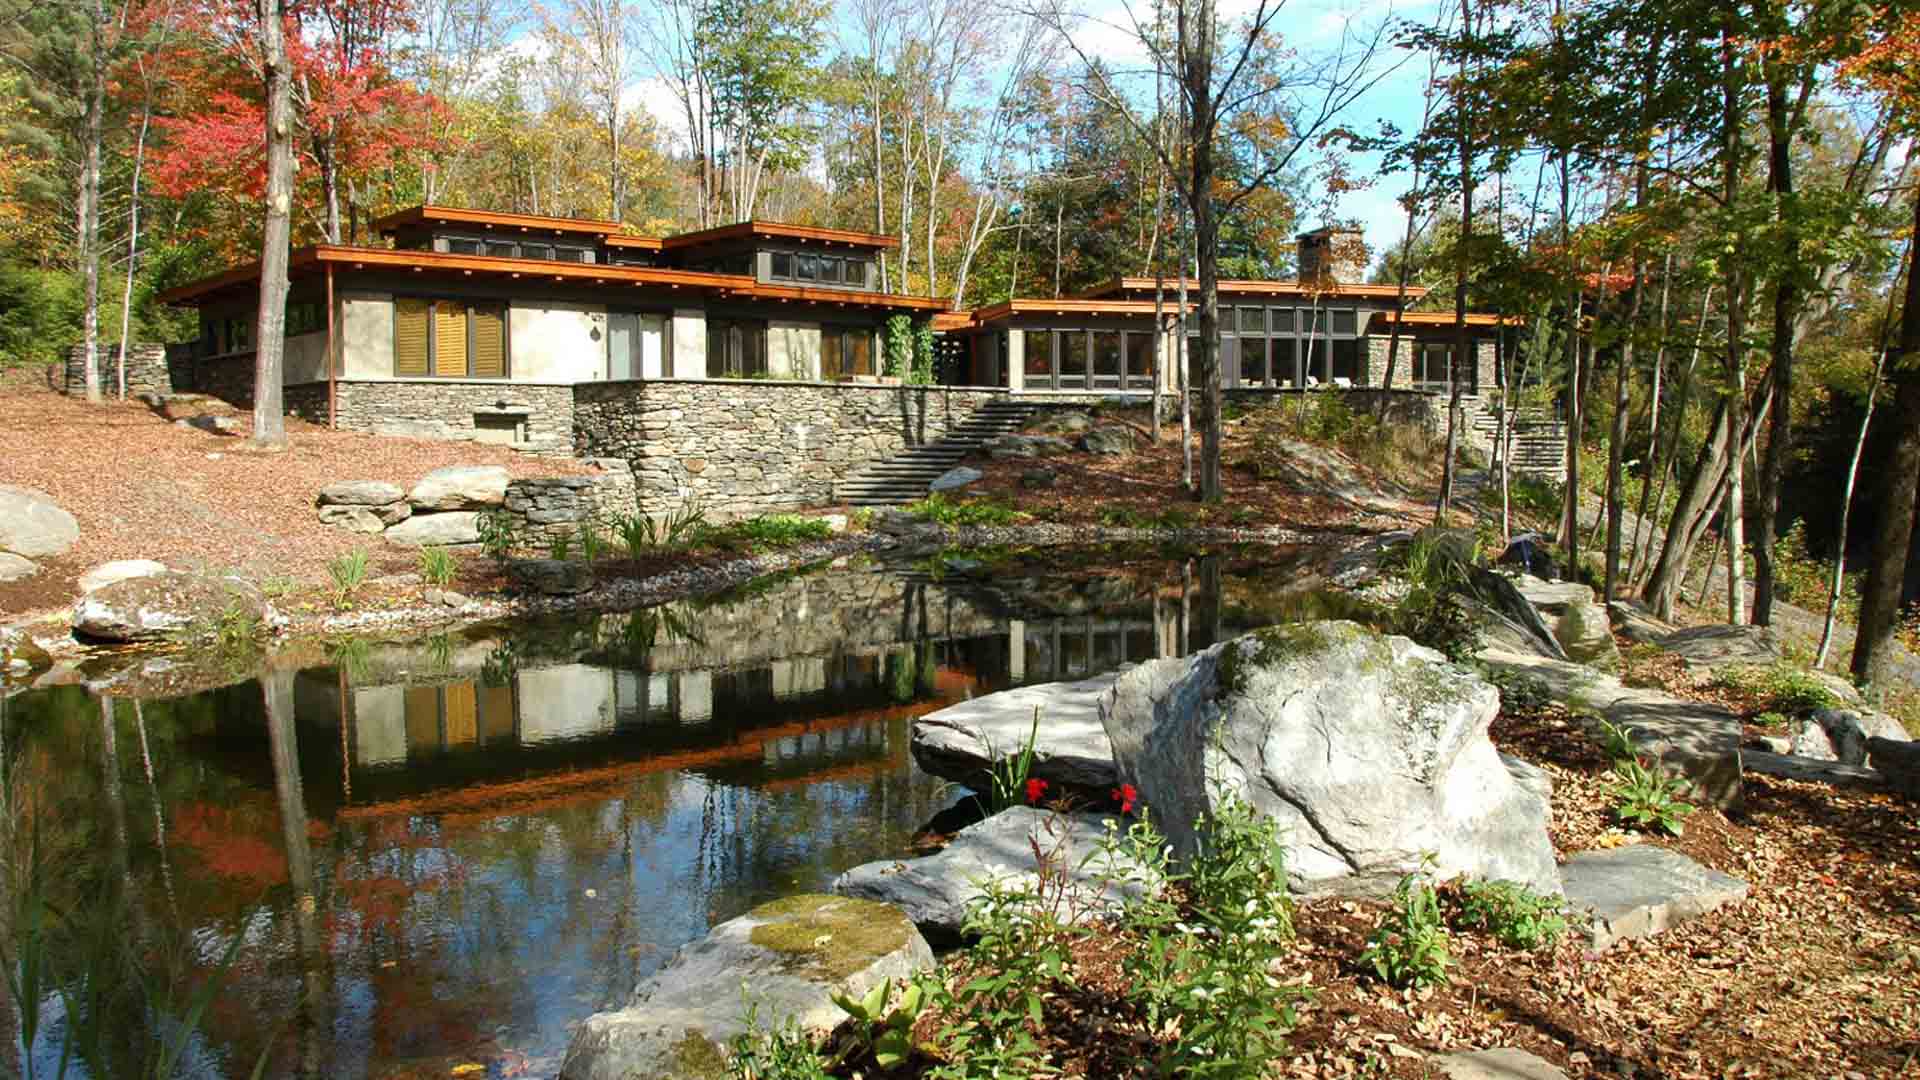 Architecture and design of River House - Middlesex, Vermont